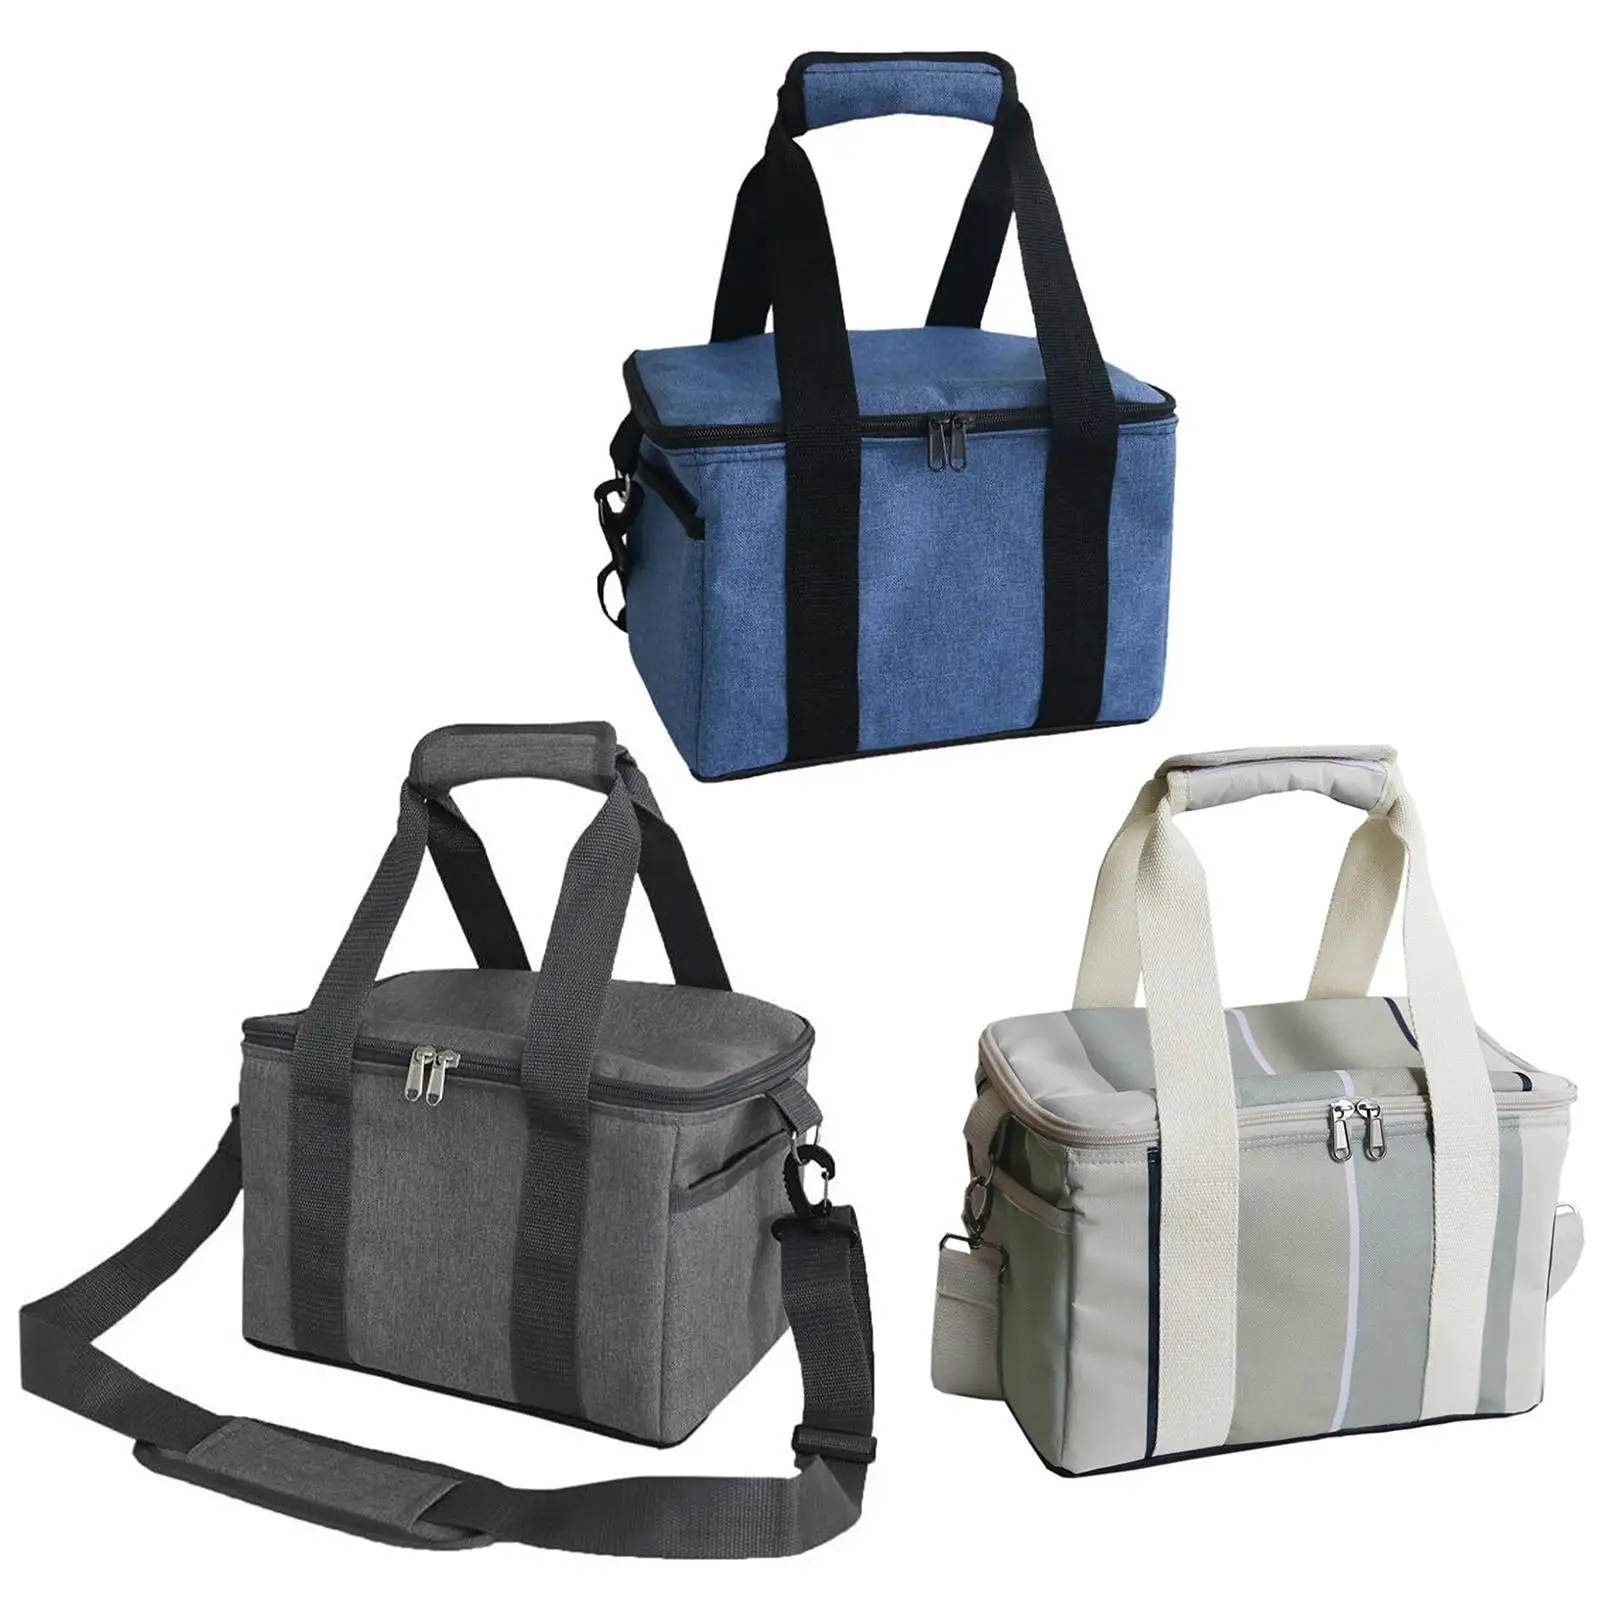 Large Oxford Cloth Insulated Food Cooler Bag Thermal Lunch Box Hot & Cold Container Handbag Outdoor Camping Hand Bags